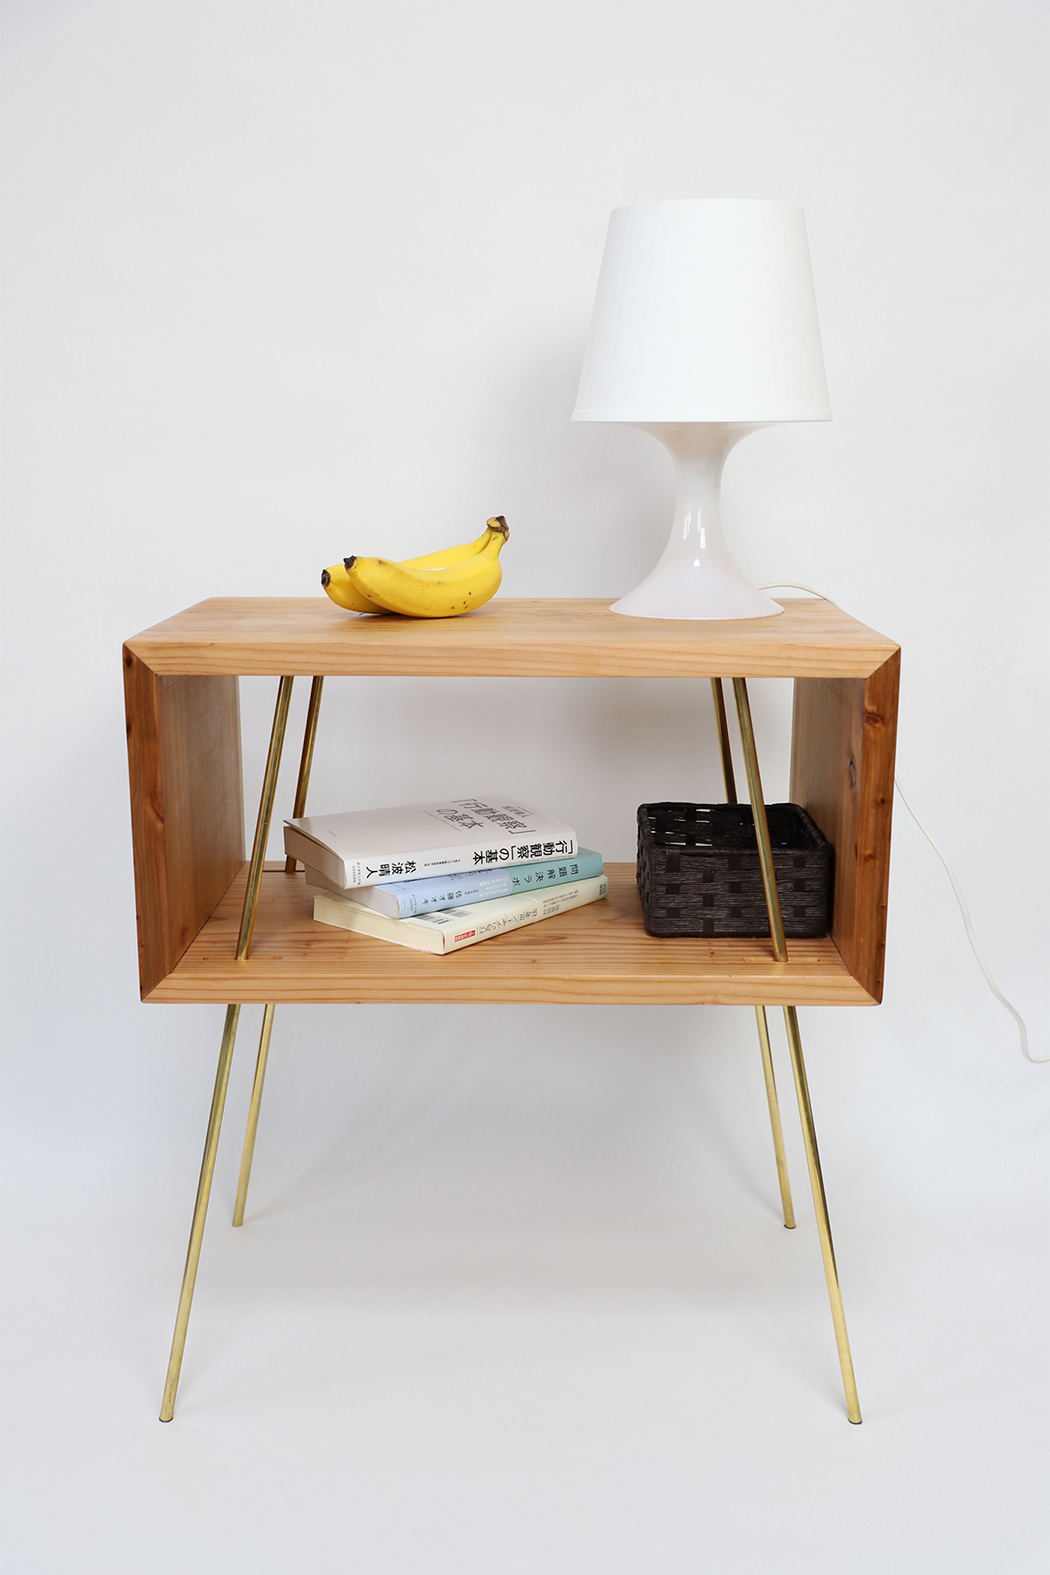 Thanks to the simplicity of the design and materials used this side table is great for many modern spaces